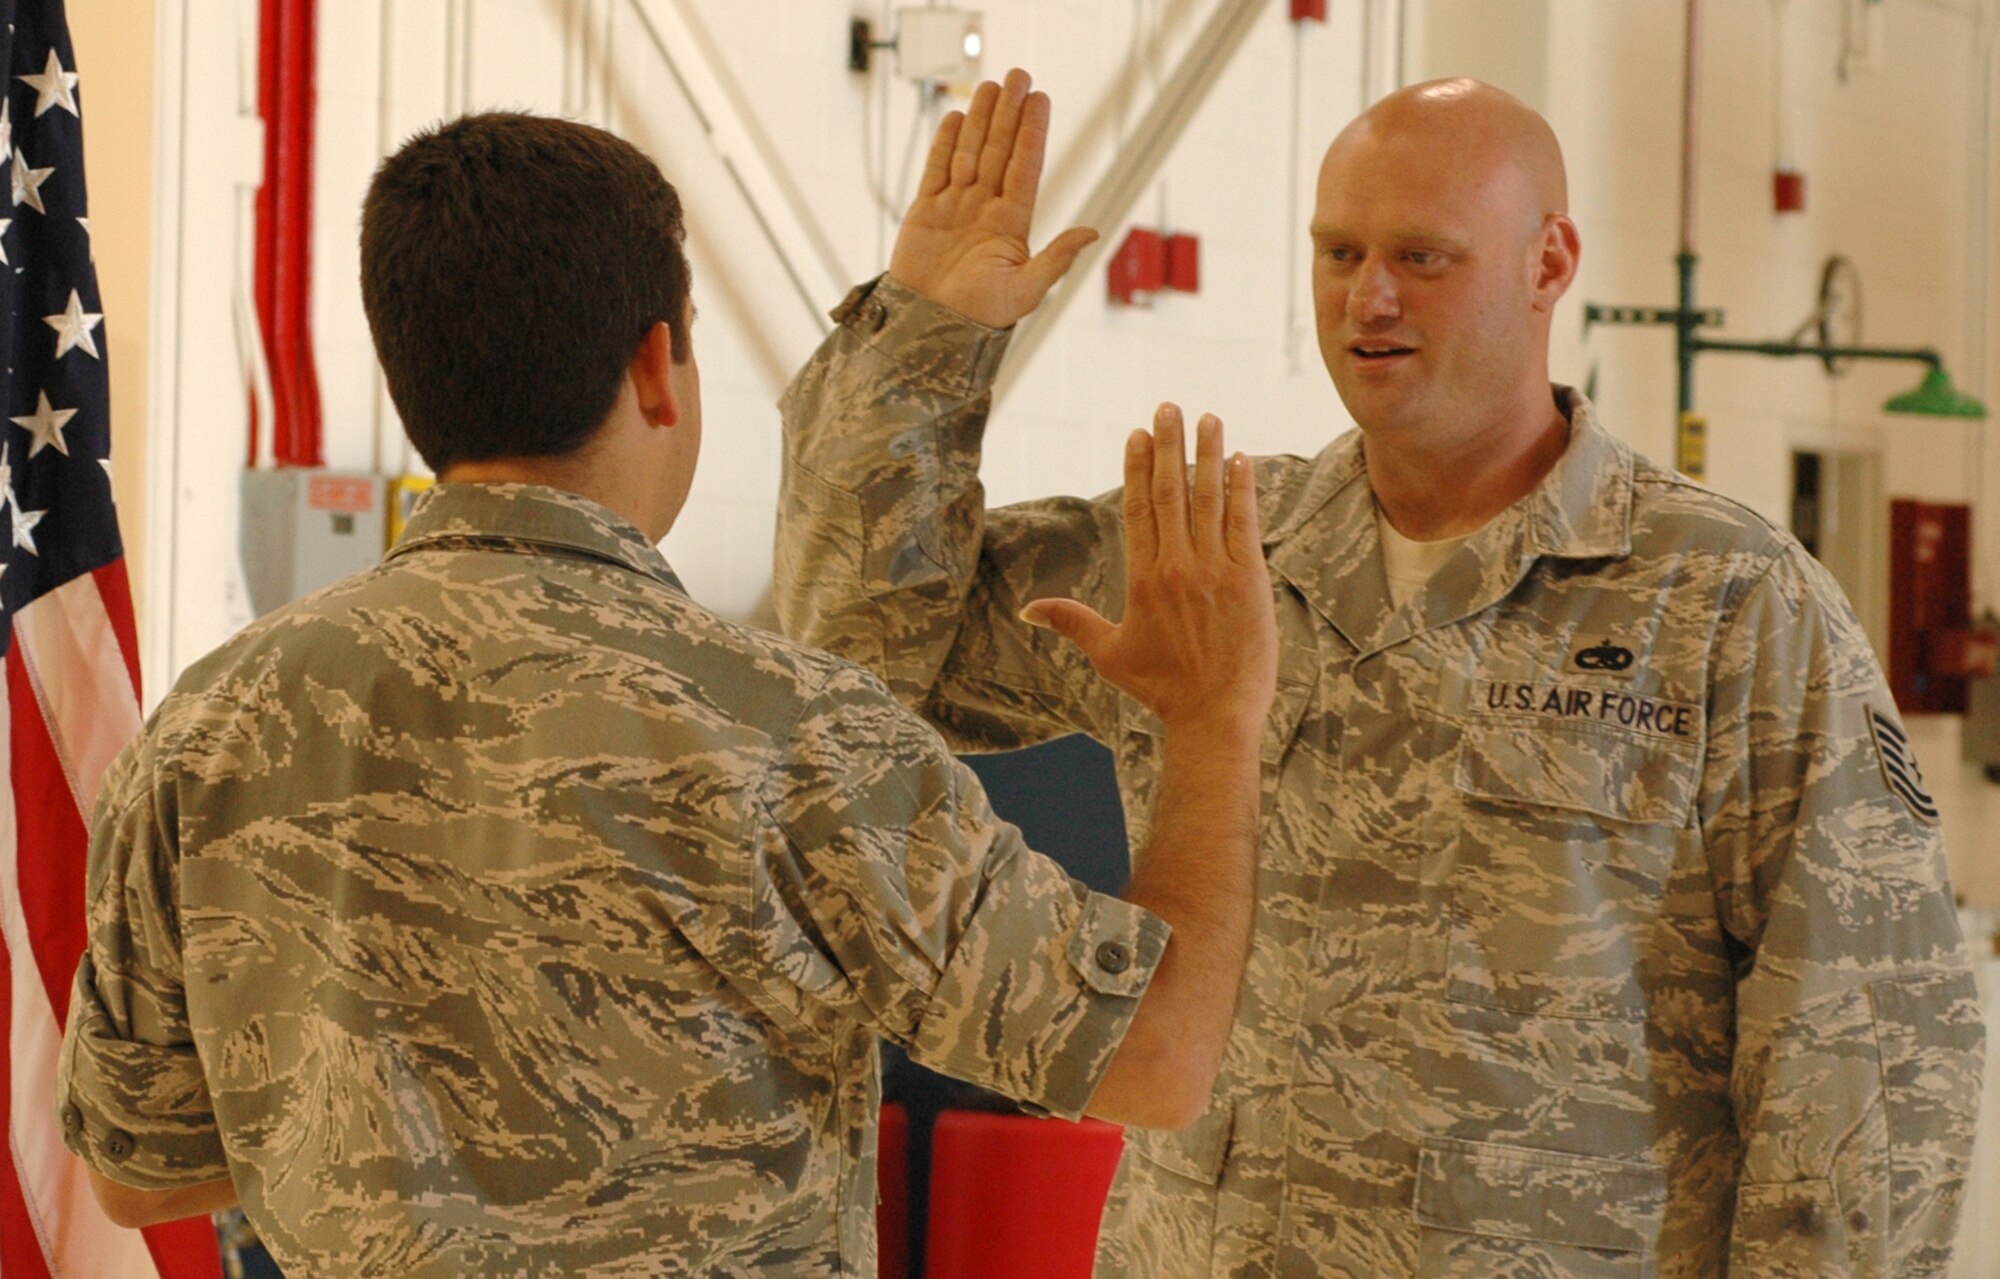 Tech. Sgt. Kennon Colvin (right) takes the oath of enlistment July 1 from Lt. Col. Carlos Ortiz, 52nd Airlift Squadron commander, at Peterson Air Force Base, Colo. Sergeant Colvin, a C-130 crew chief assigned to the 52nd AS, re-enlisted in front of other members of the squadron. Afterwards, Girls of the West ladies Jessica Greene and Dayna Jenkins surprised him with a group photo. Both Miss Greene, the Girl of the West, and her aide, Miss Jenkins, received an up-close look at the 302nd Airlift Wing's primary mission of tactical airlift and airdrop and experienced the re-enlistment ceremony for the 52nd AS member. The 52nd AS is an Active Duty C-130 unit associated with the 302nd AW. The 302nd AW is an AF Reserve-assigned unit also charged with mission of aerial firefighting using the Modular Airborne Firefighting System. For more information on the Girls of the West, visit www.coloradospringsrodeo.com. (U.S. Air Force photo/Staff Sgt. Stephen J. Collier)